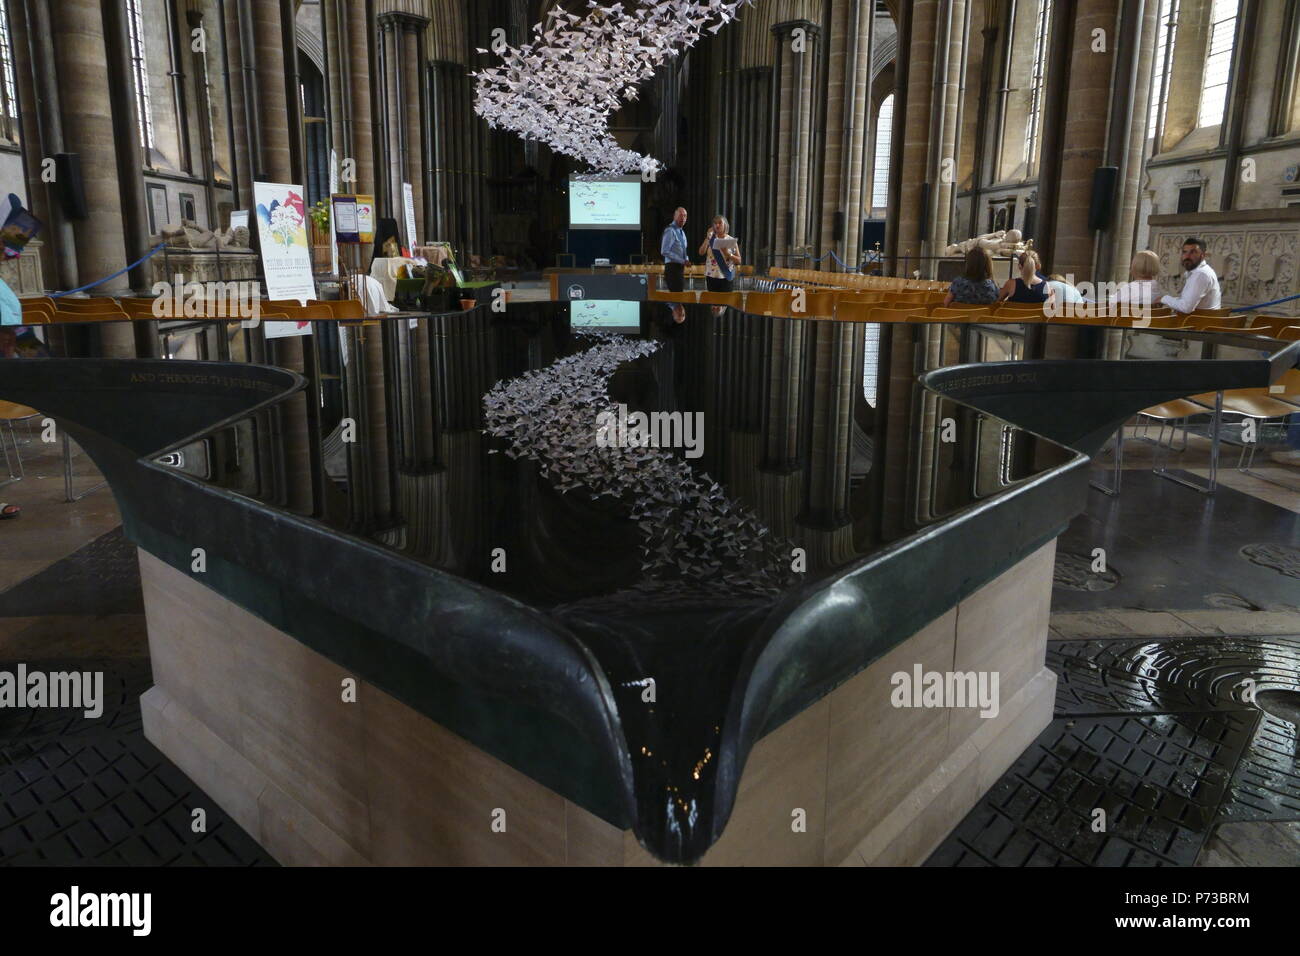 4th July, 2018:  Salisbury, Wilts, UK  The Colombes exhibition within the nave of Salisbury Catherdral, to try to bring the local community back together after the local disaster of the nerve gas attack and to mark the 100th anniversary of the end of World War 1 Credit: Motofoto/Alamy Live News Stock Photo